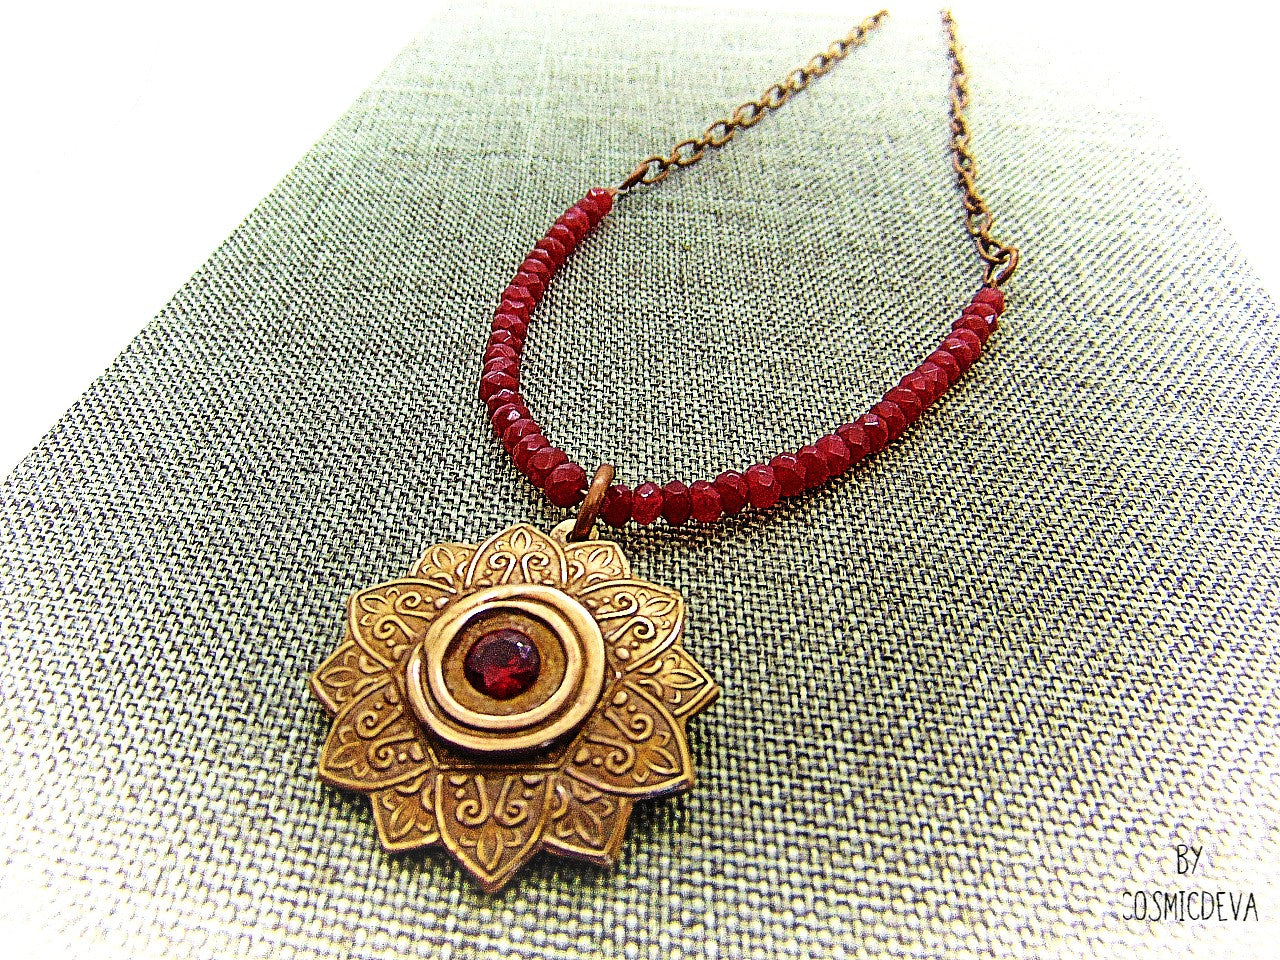 Celebrate your spiritual side with this unique Red Ruby Mandala Mendhi Gold Bronze Necklace. Crafted with a hand-formed bronze pendant, a stunning faceted lab-created ruby gemstone, and adorned with small red jade rondelle beads, this one of a kind necklace is an inspired homage to Indian Mehndi culture. Fall in love with the beauty and mystery of this spiritual accessory!